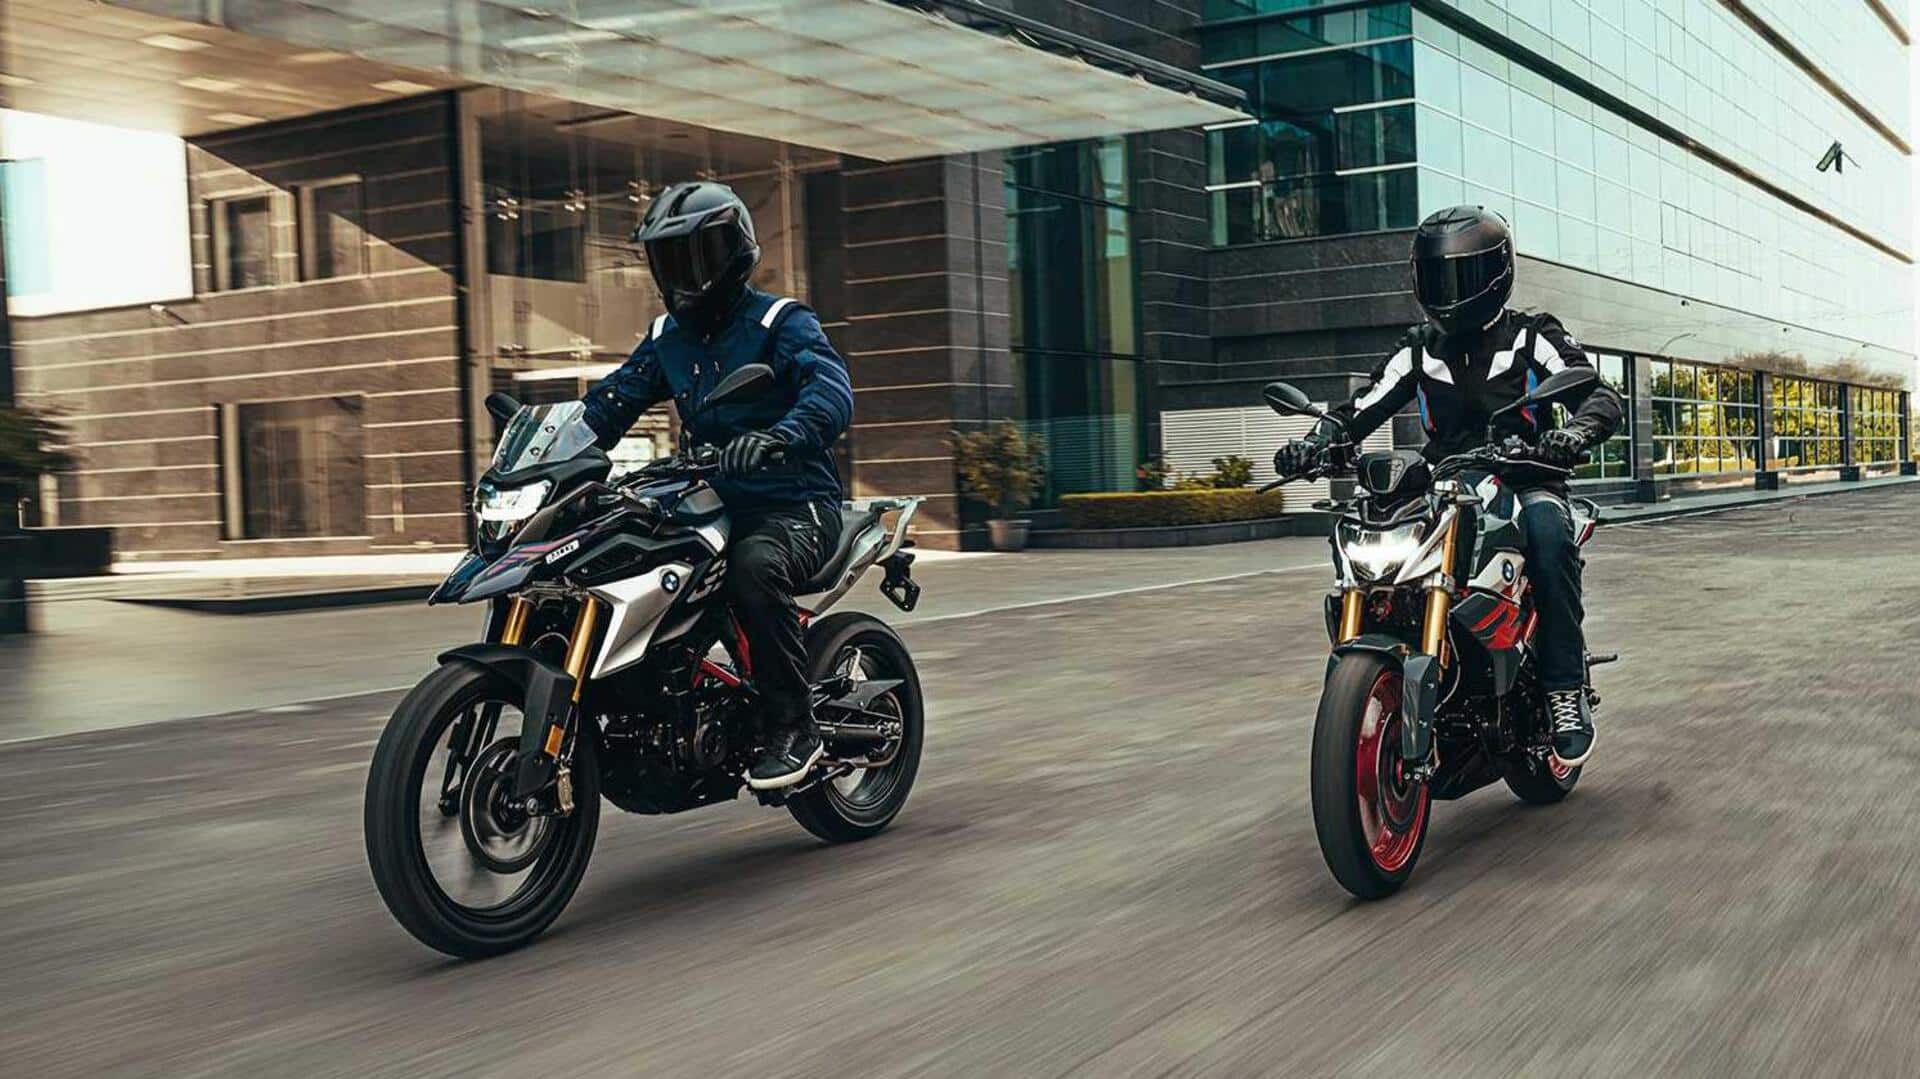 BMW Motorrad India might retail over 9,000 units this year